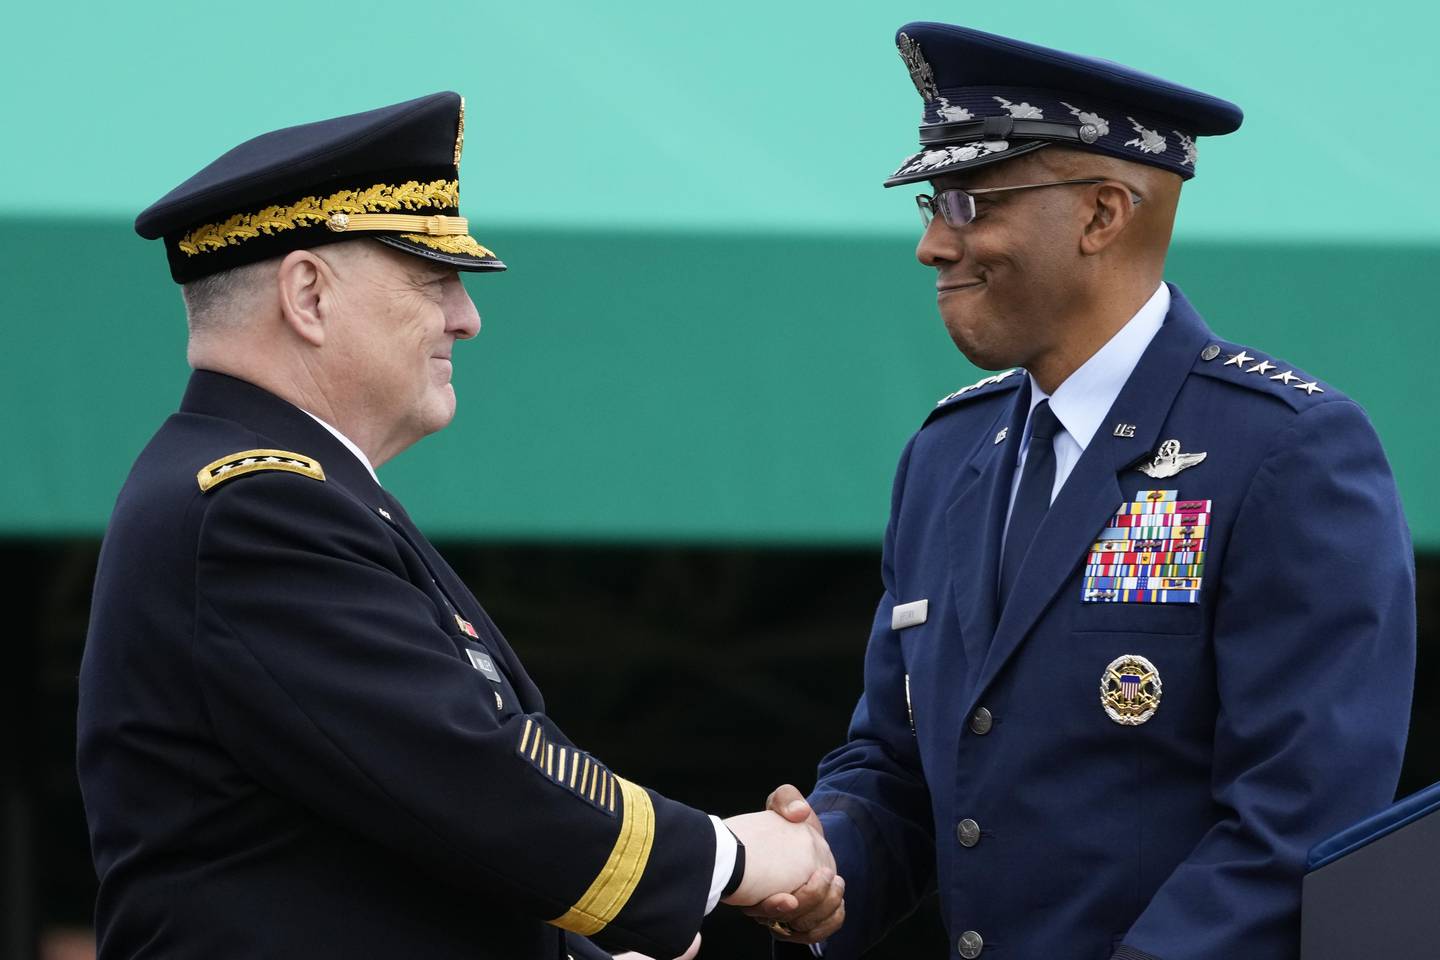 Retiring Chairman of the Joint Chiefs of Staff Gen. Mark Milley, left, shakes hands with Gen. CQ Brown, Jr., the incoming chairman, right, during the Armed Forces Farewell Tribute in honor of Milley at Joint Base Myer-Henderson Hall, Friday, Sept. 29, 2023, in Fort Meyer, Va.